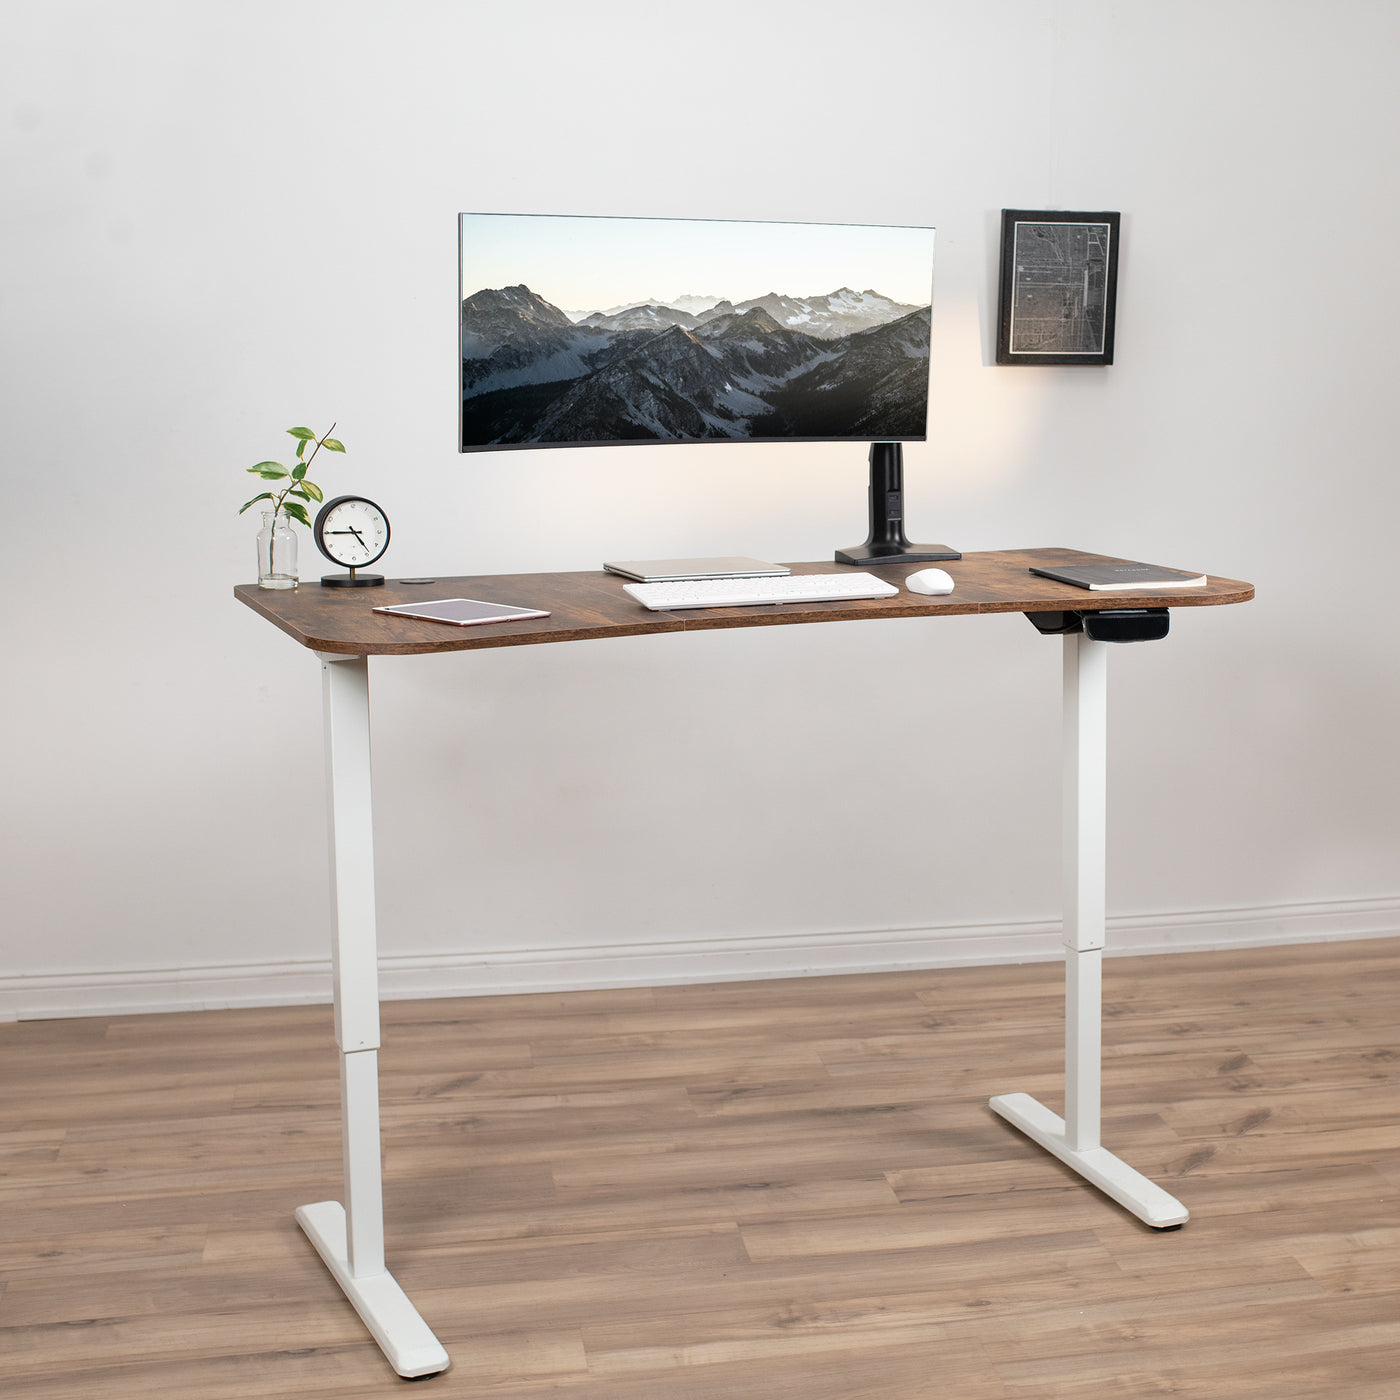 Rustic ergonomic sit or stand active workstation with adjustable height using touch screen control panel.